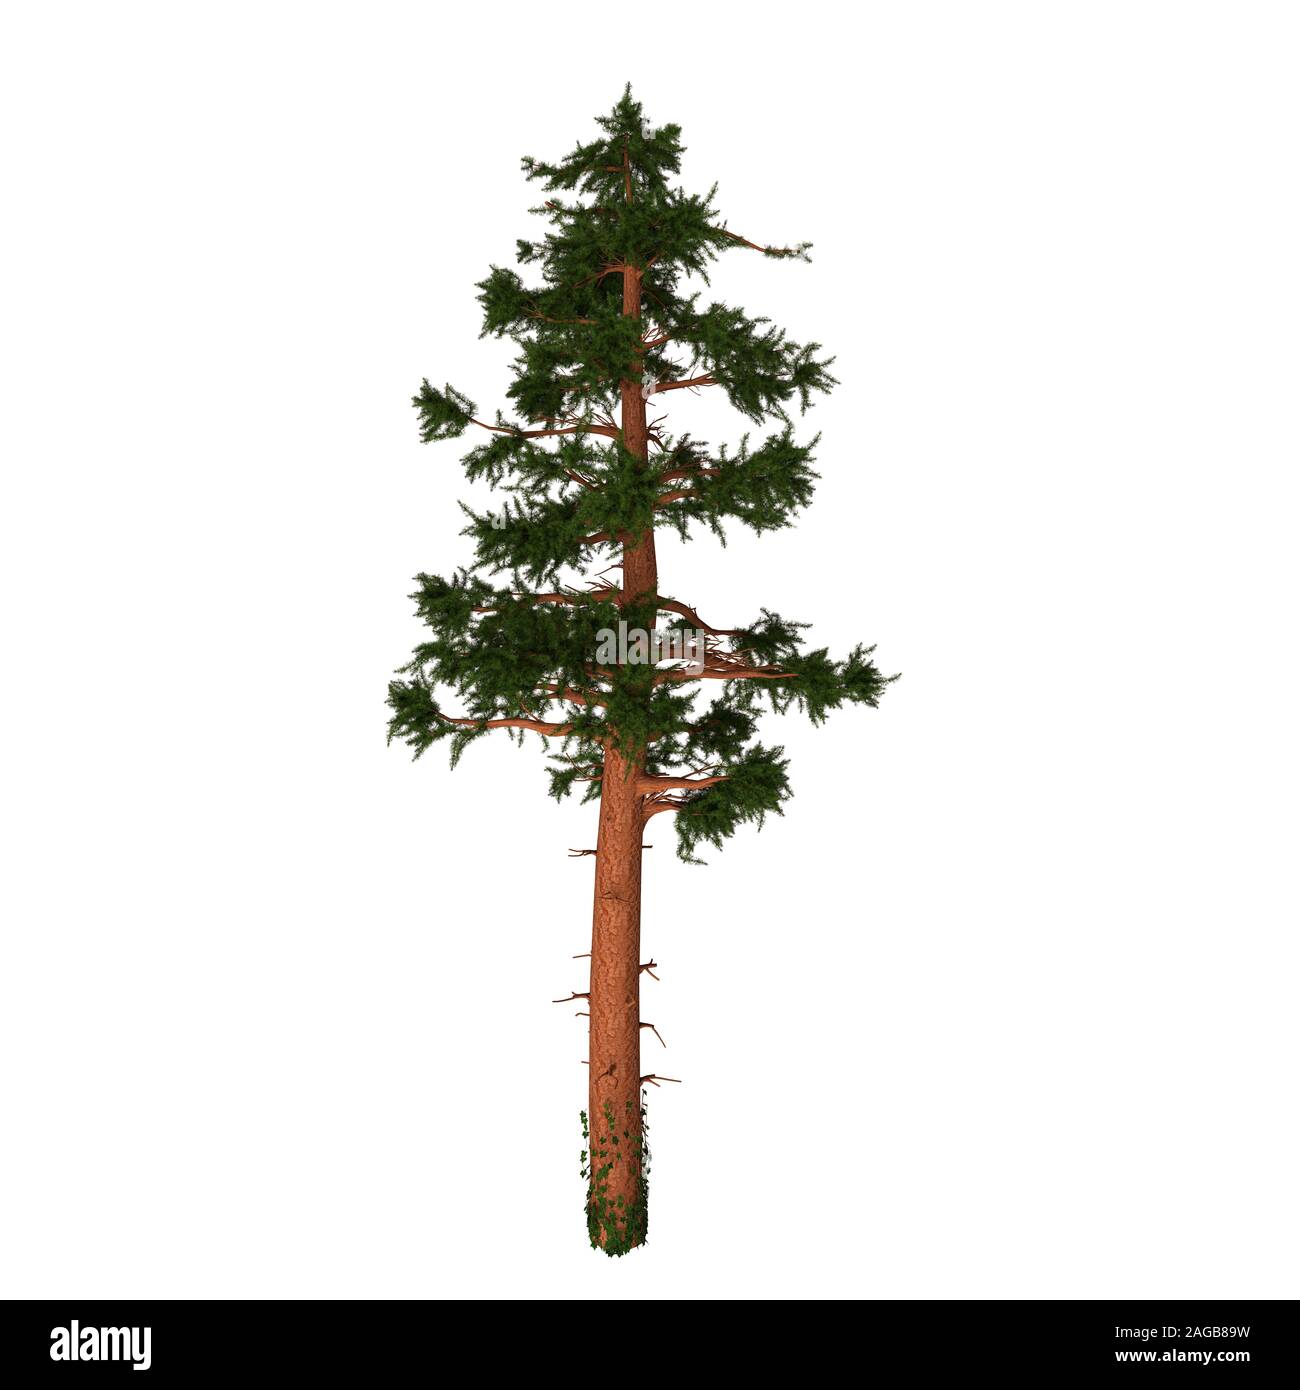 The California Red Fir or Silvertip is a coniferous evergreen pine tree native to Oregon and California in North America. Stock Photo